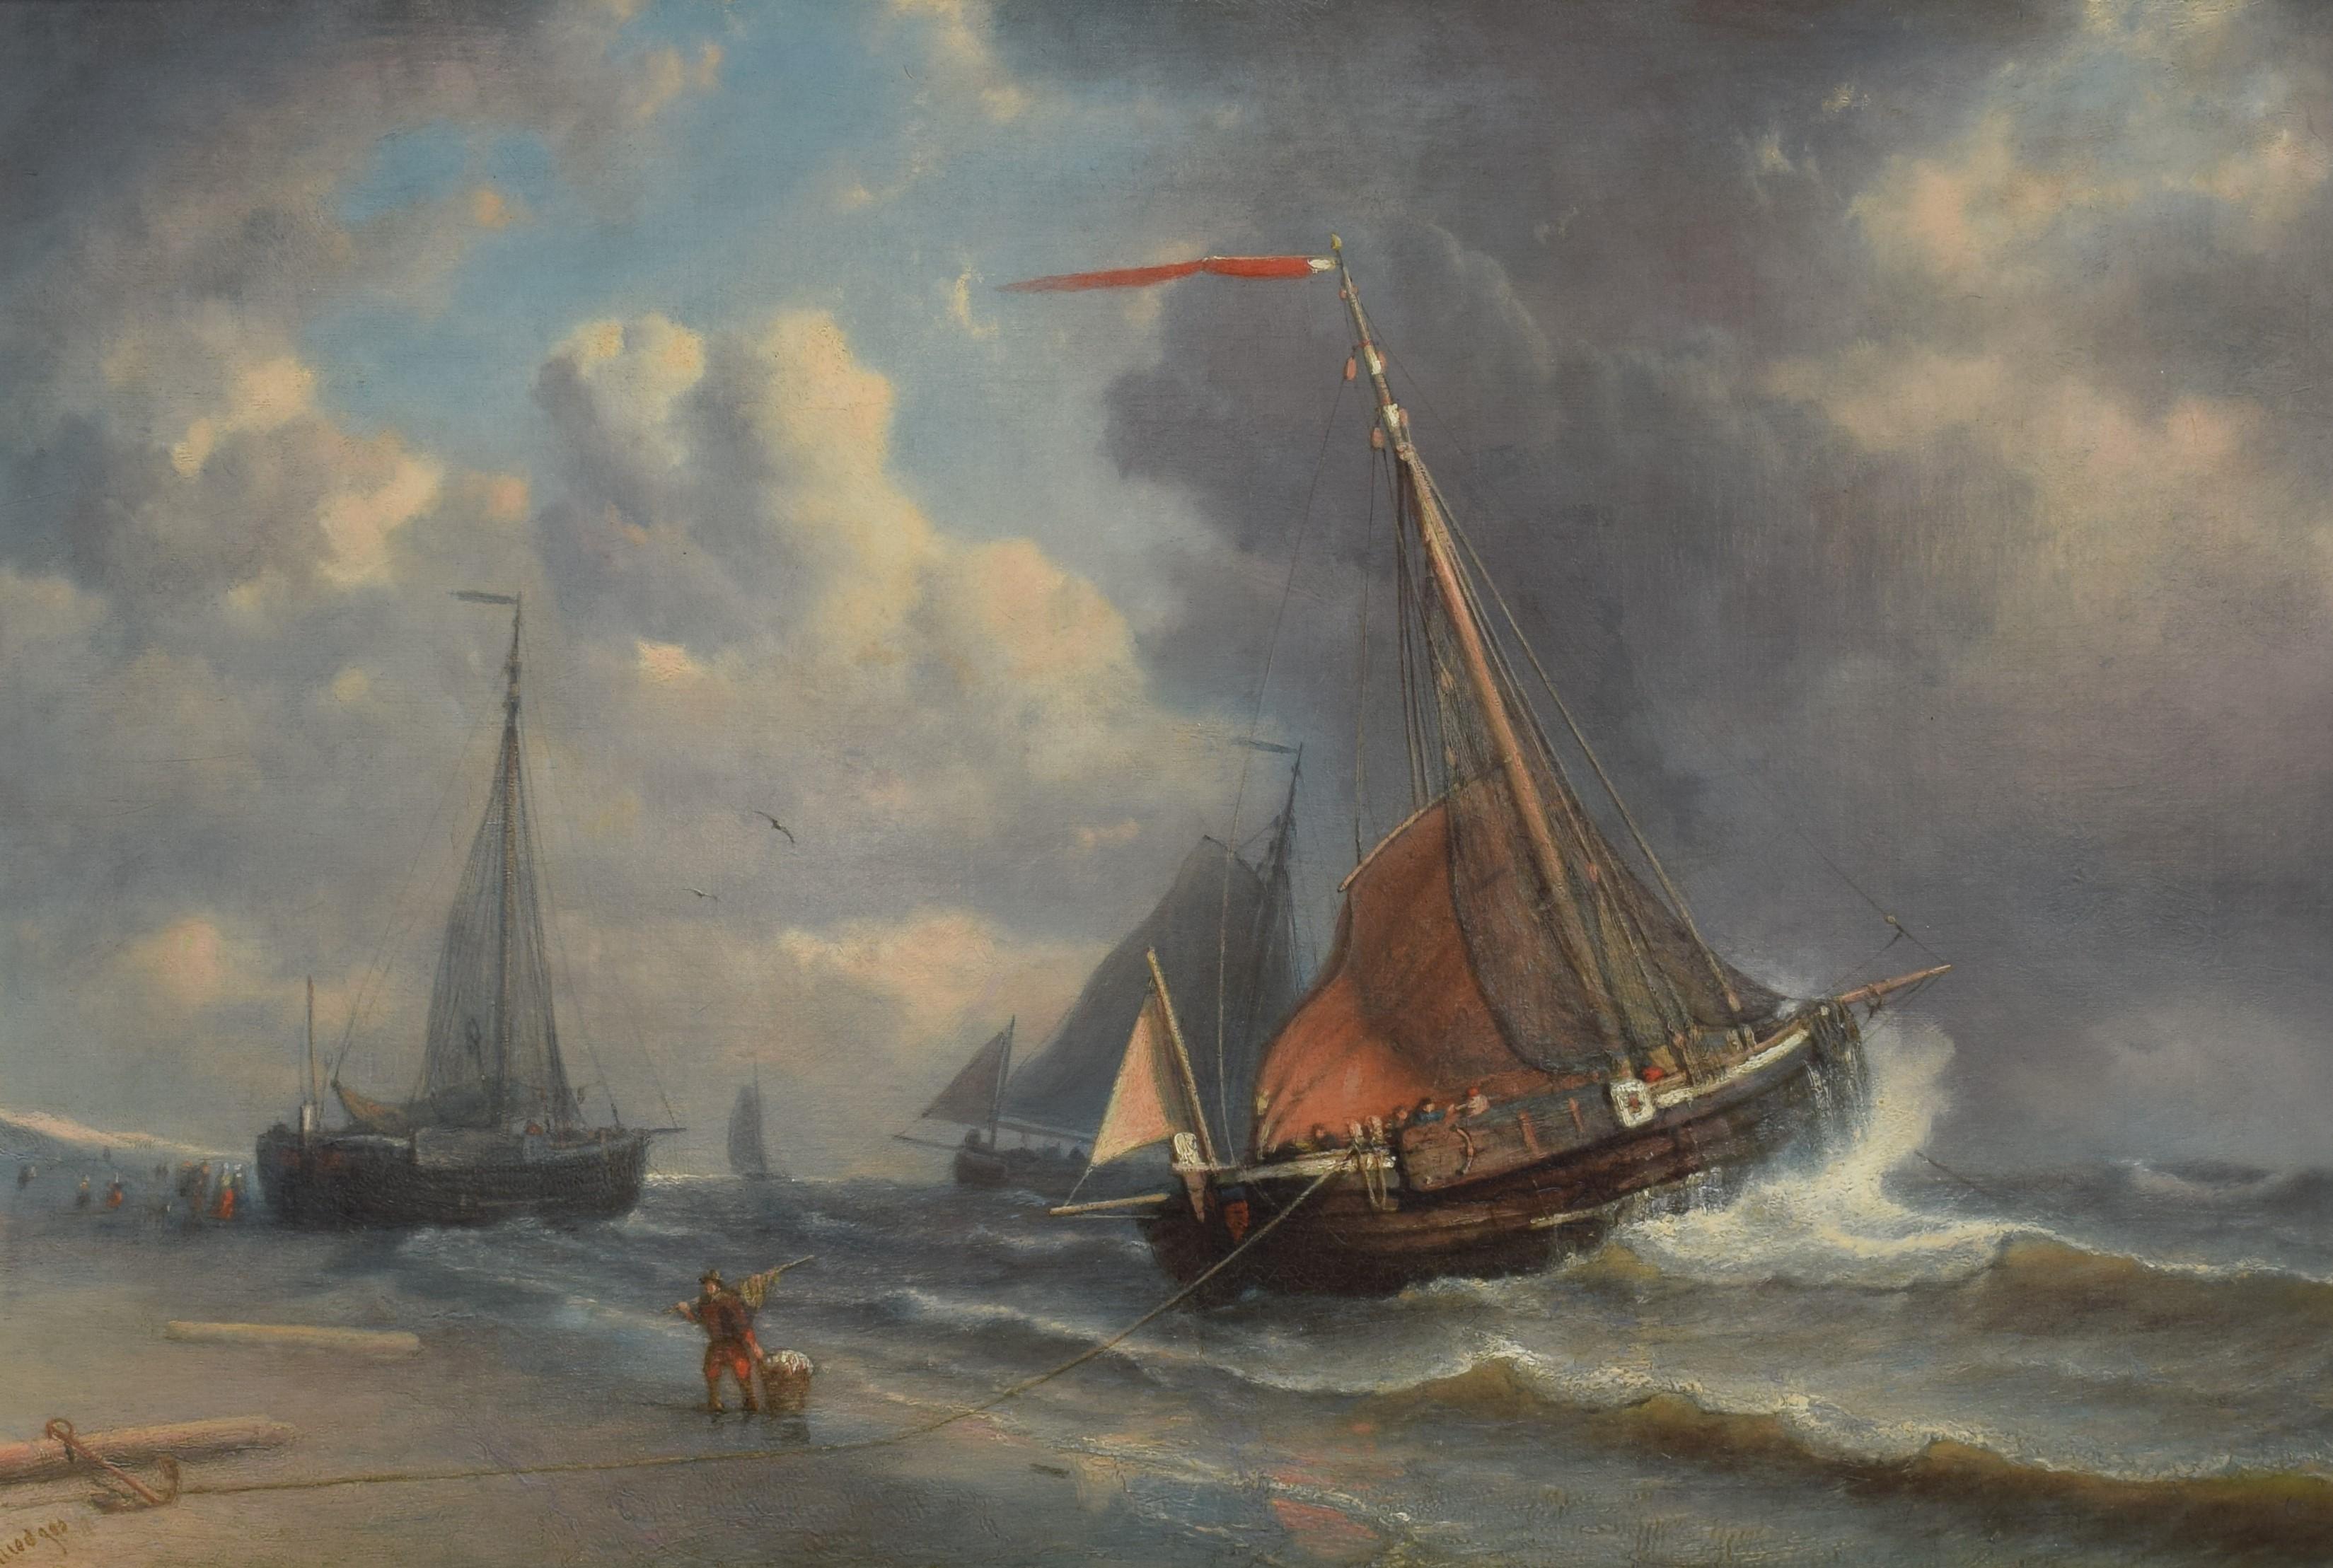 Boats on the wild sea - Marouflage - Painting by Petrus Paulus Schiedges